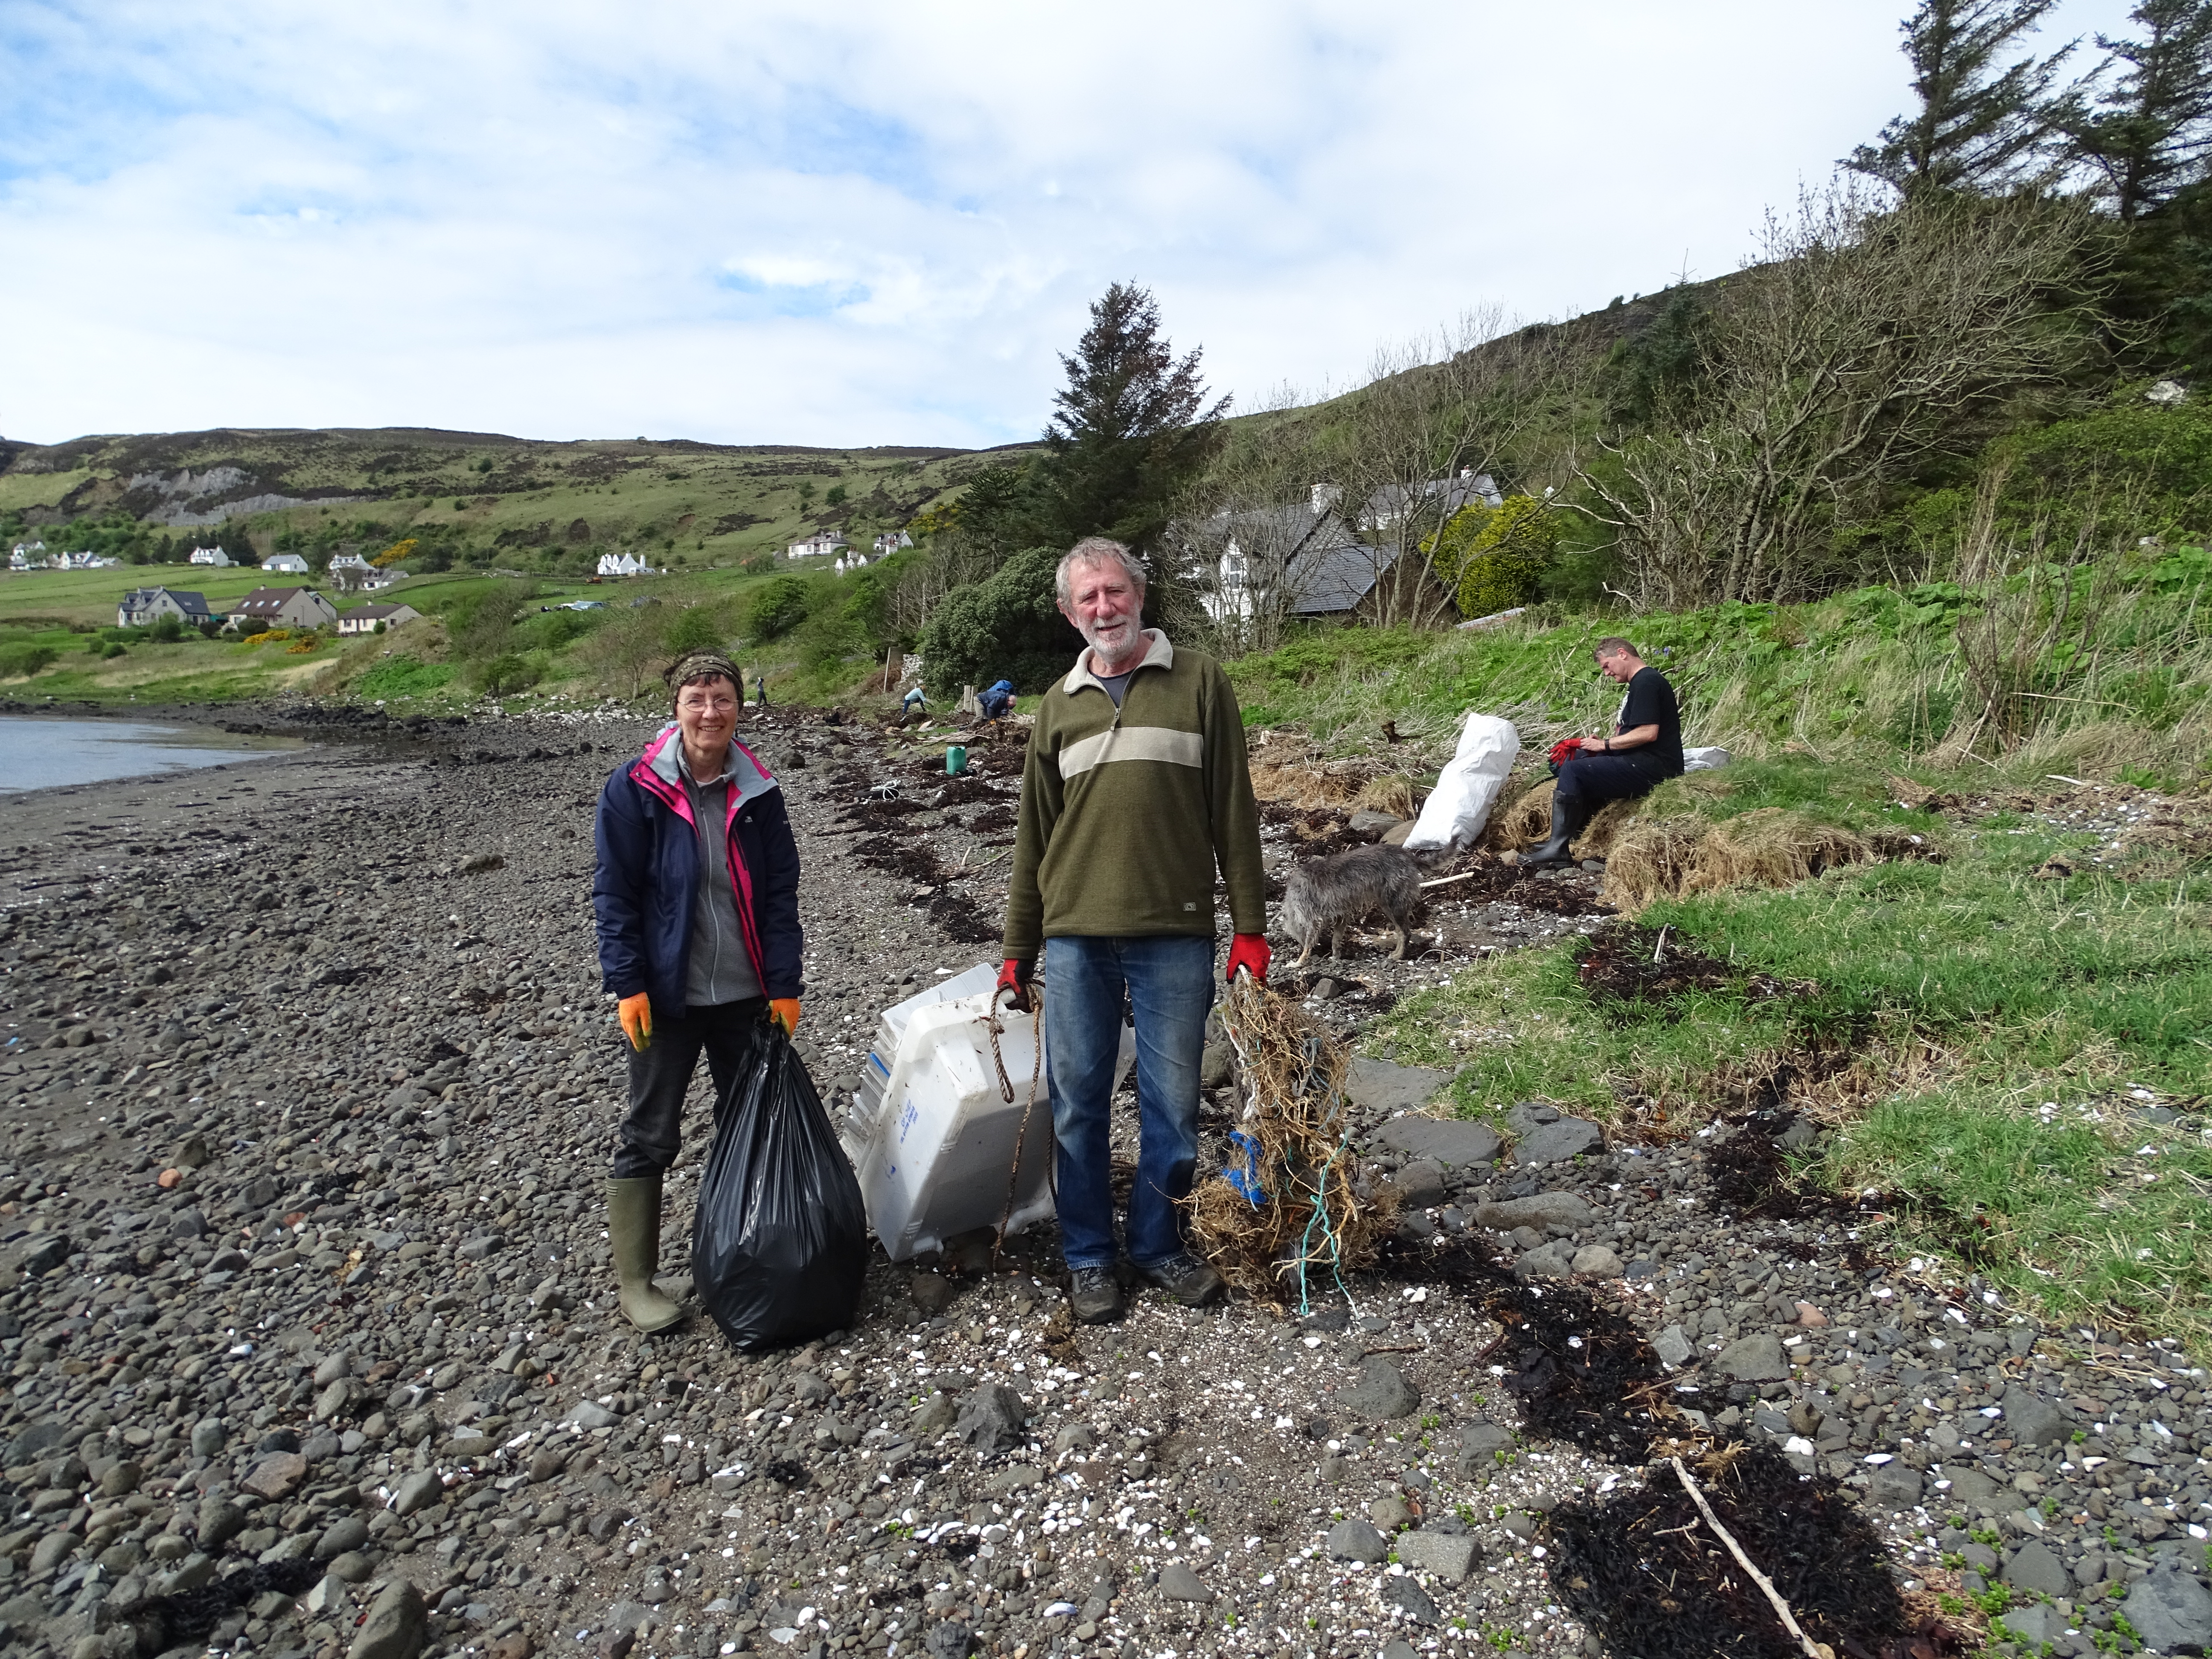 Over 50 volunteers offered their assistance with the annual beach clean in the north end of Skye